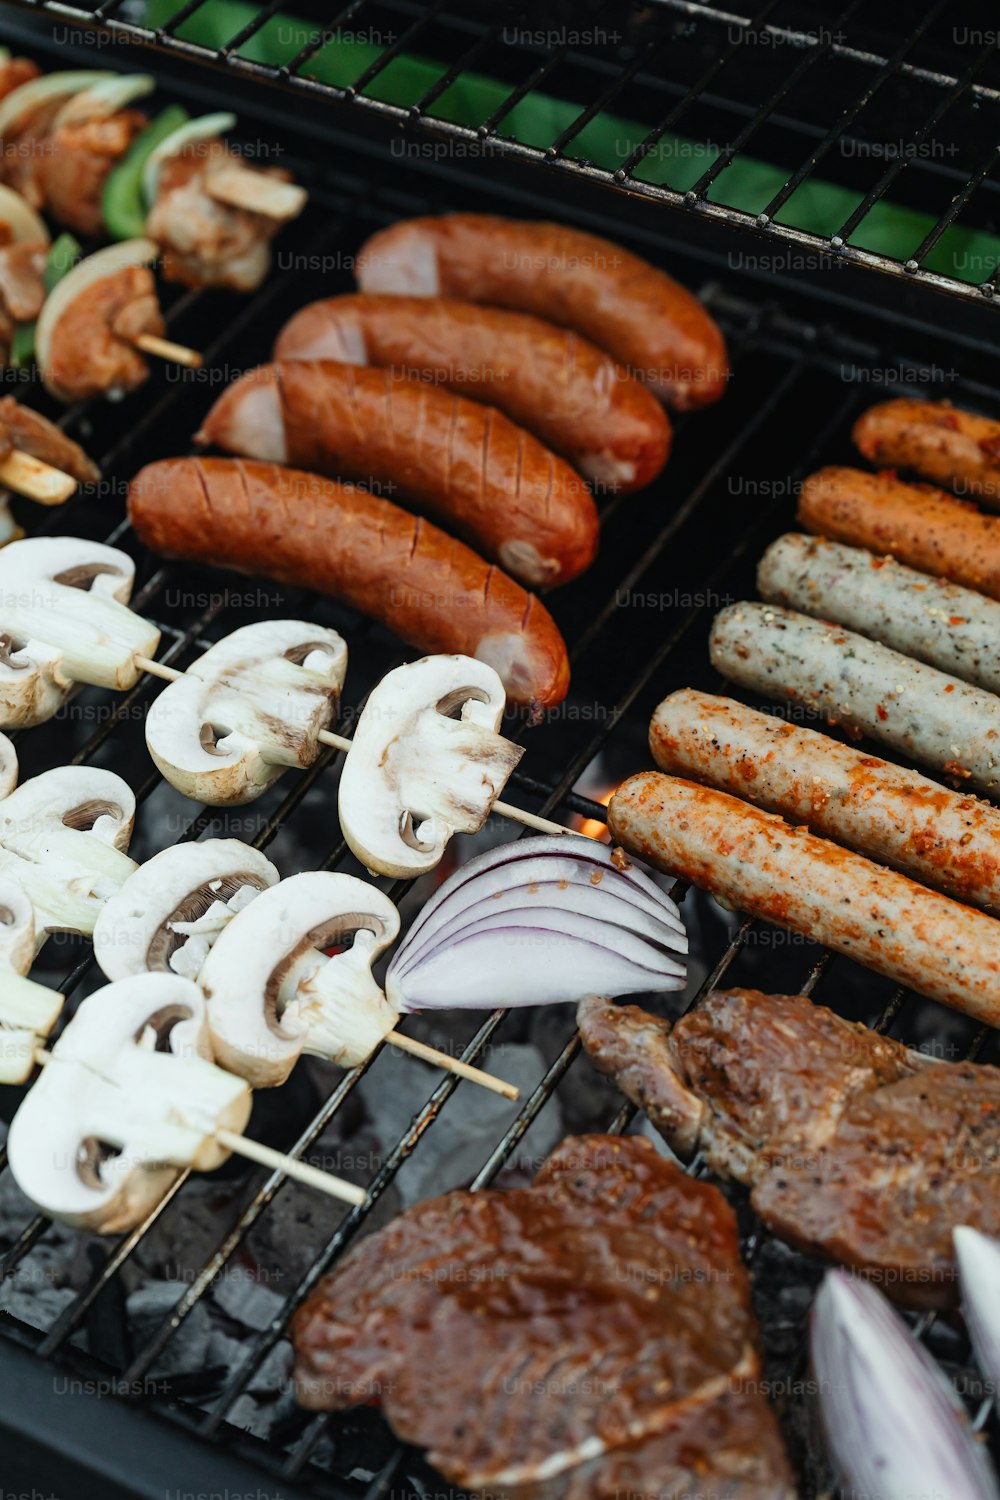 sausages, mushrooms, and mushrooms are cooking on a grill